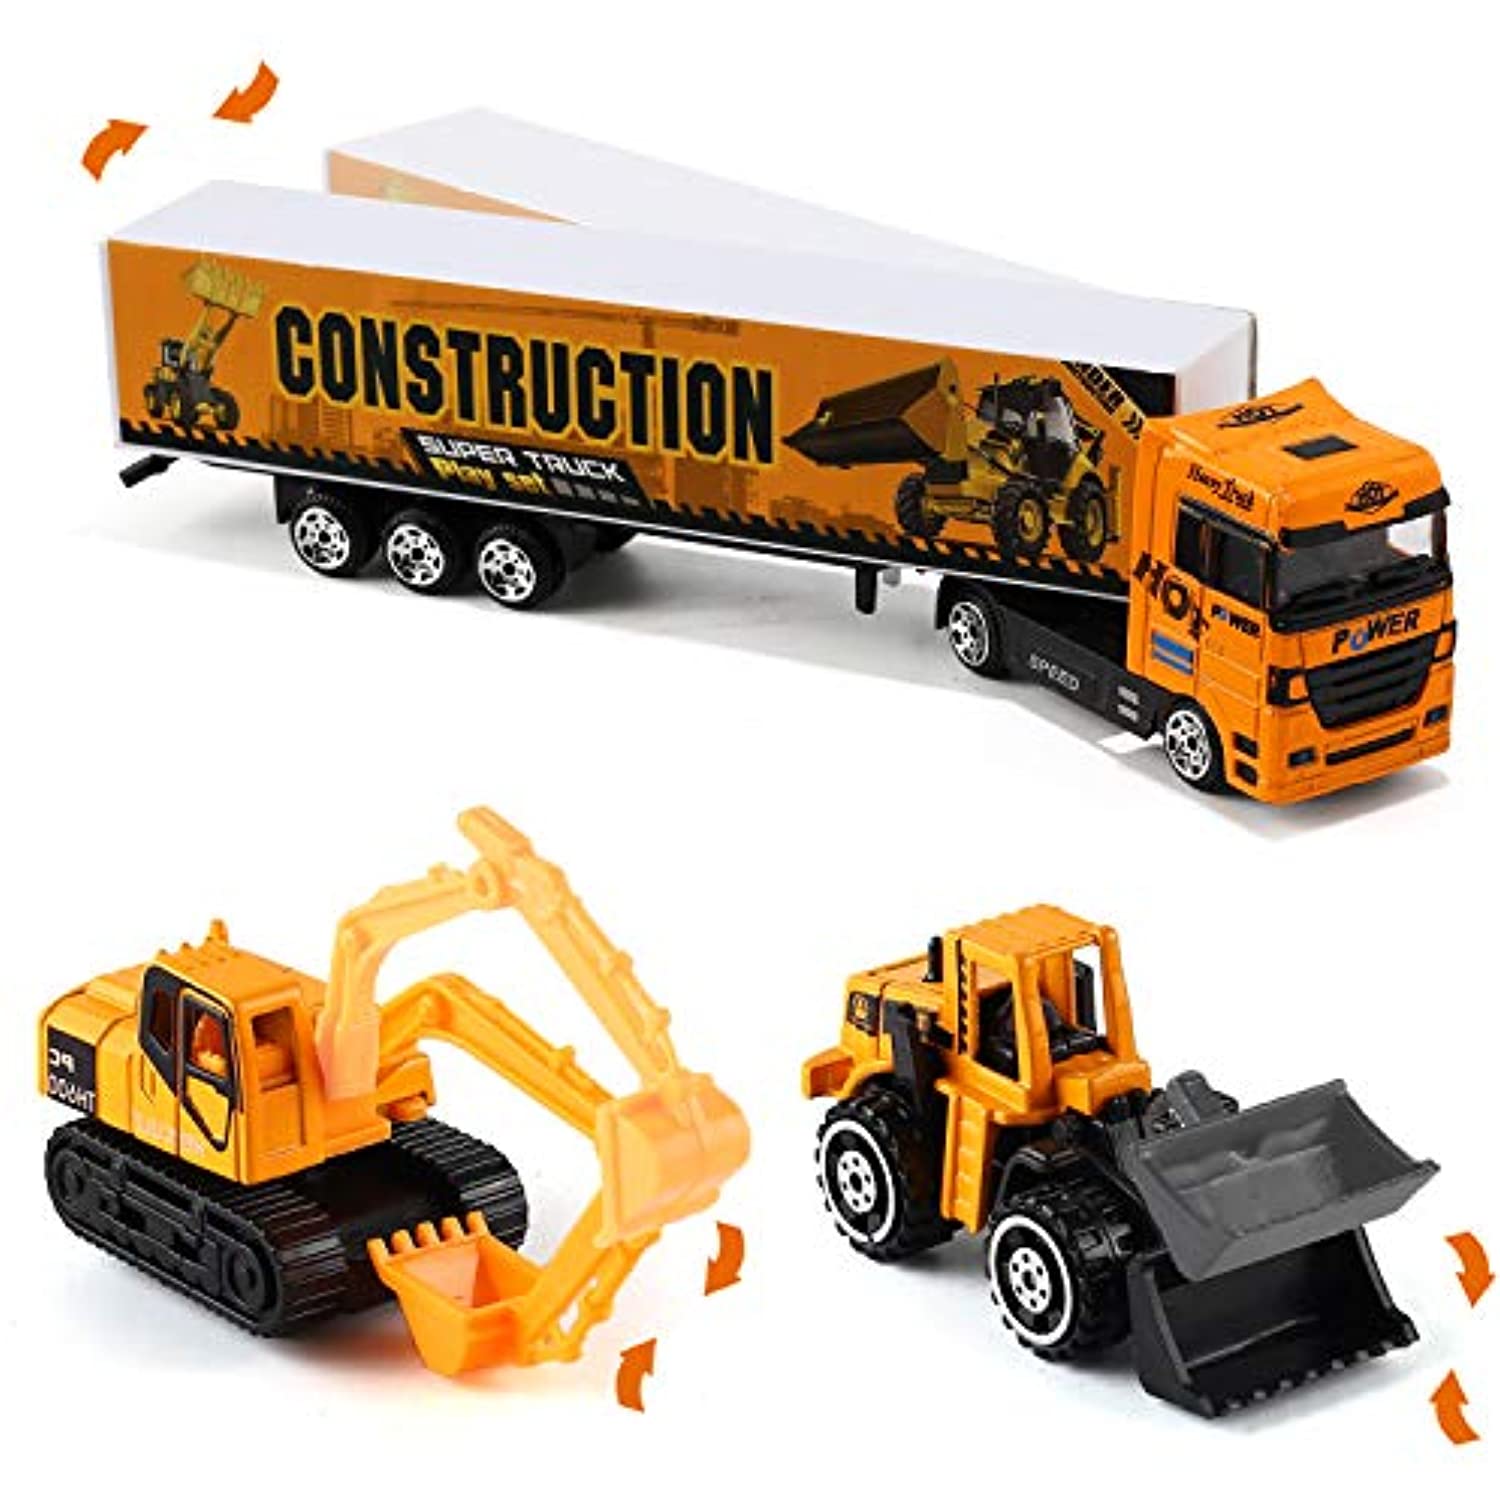 19 in 1 Construction Truck with Engineering Worker Toy Set, Mini Die-Cast Engine Car in Carrier Truck, Double Side Transport Vehicle Play for Child Kid Boy Girl Birthday Christmas Party Favors - image 6 of 7